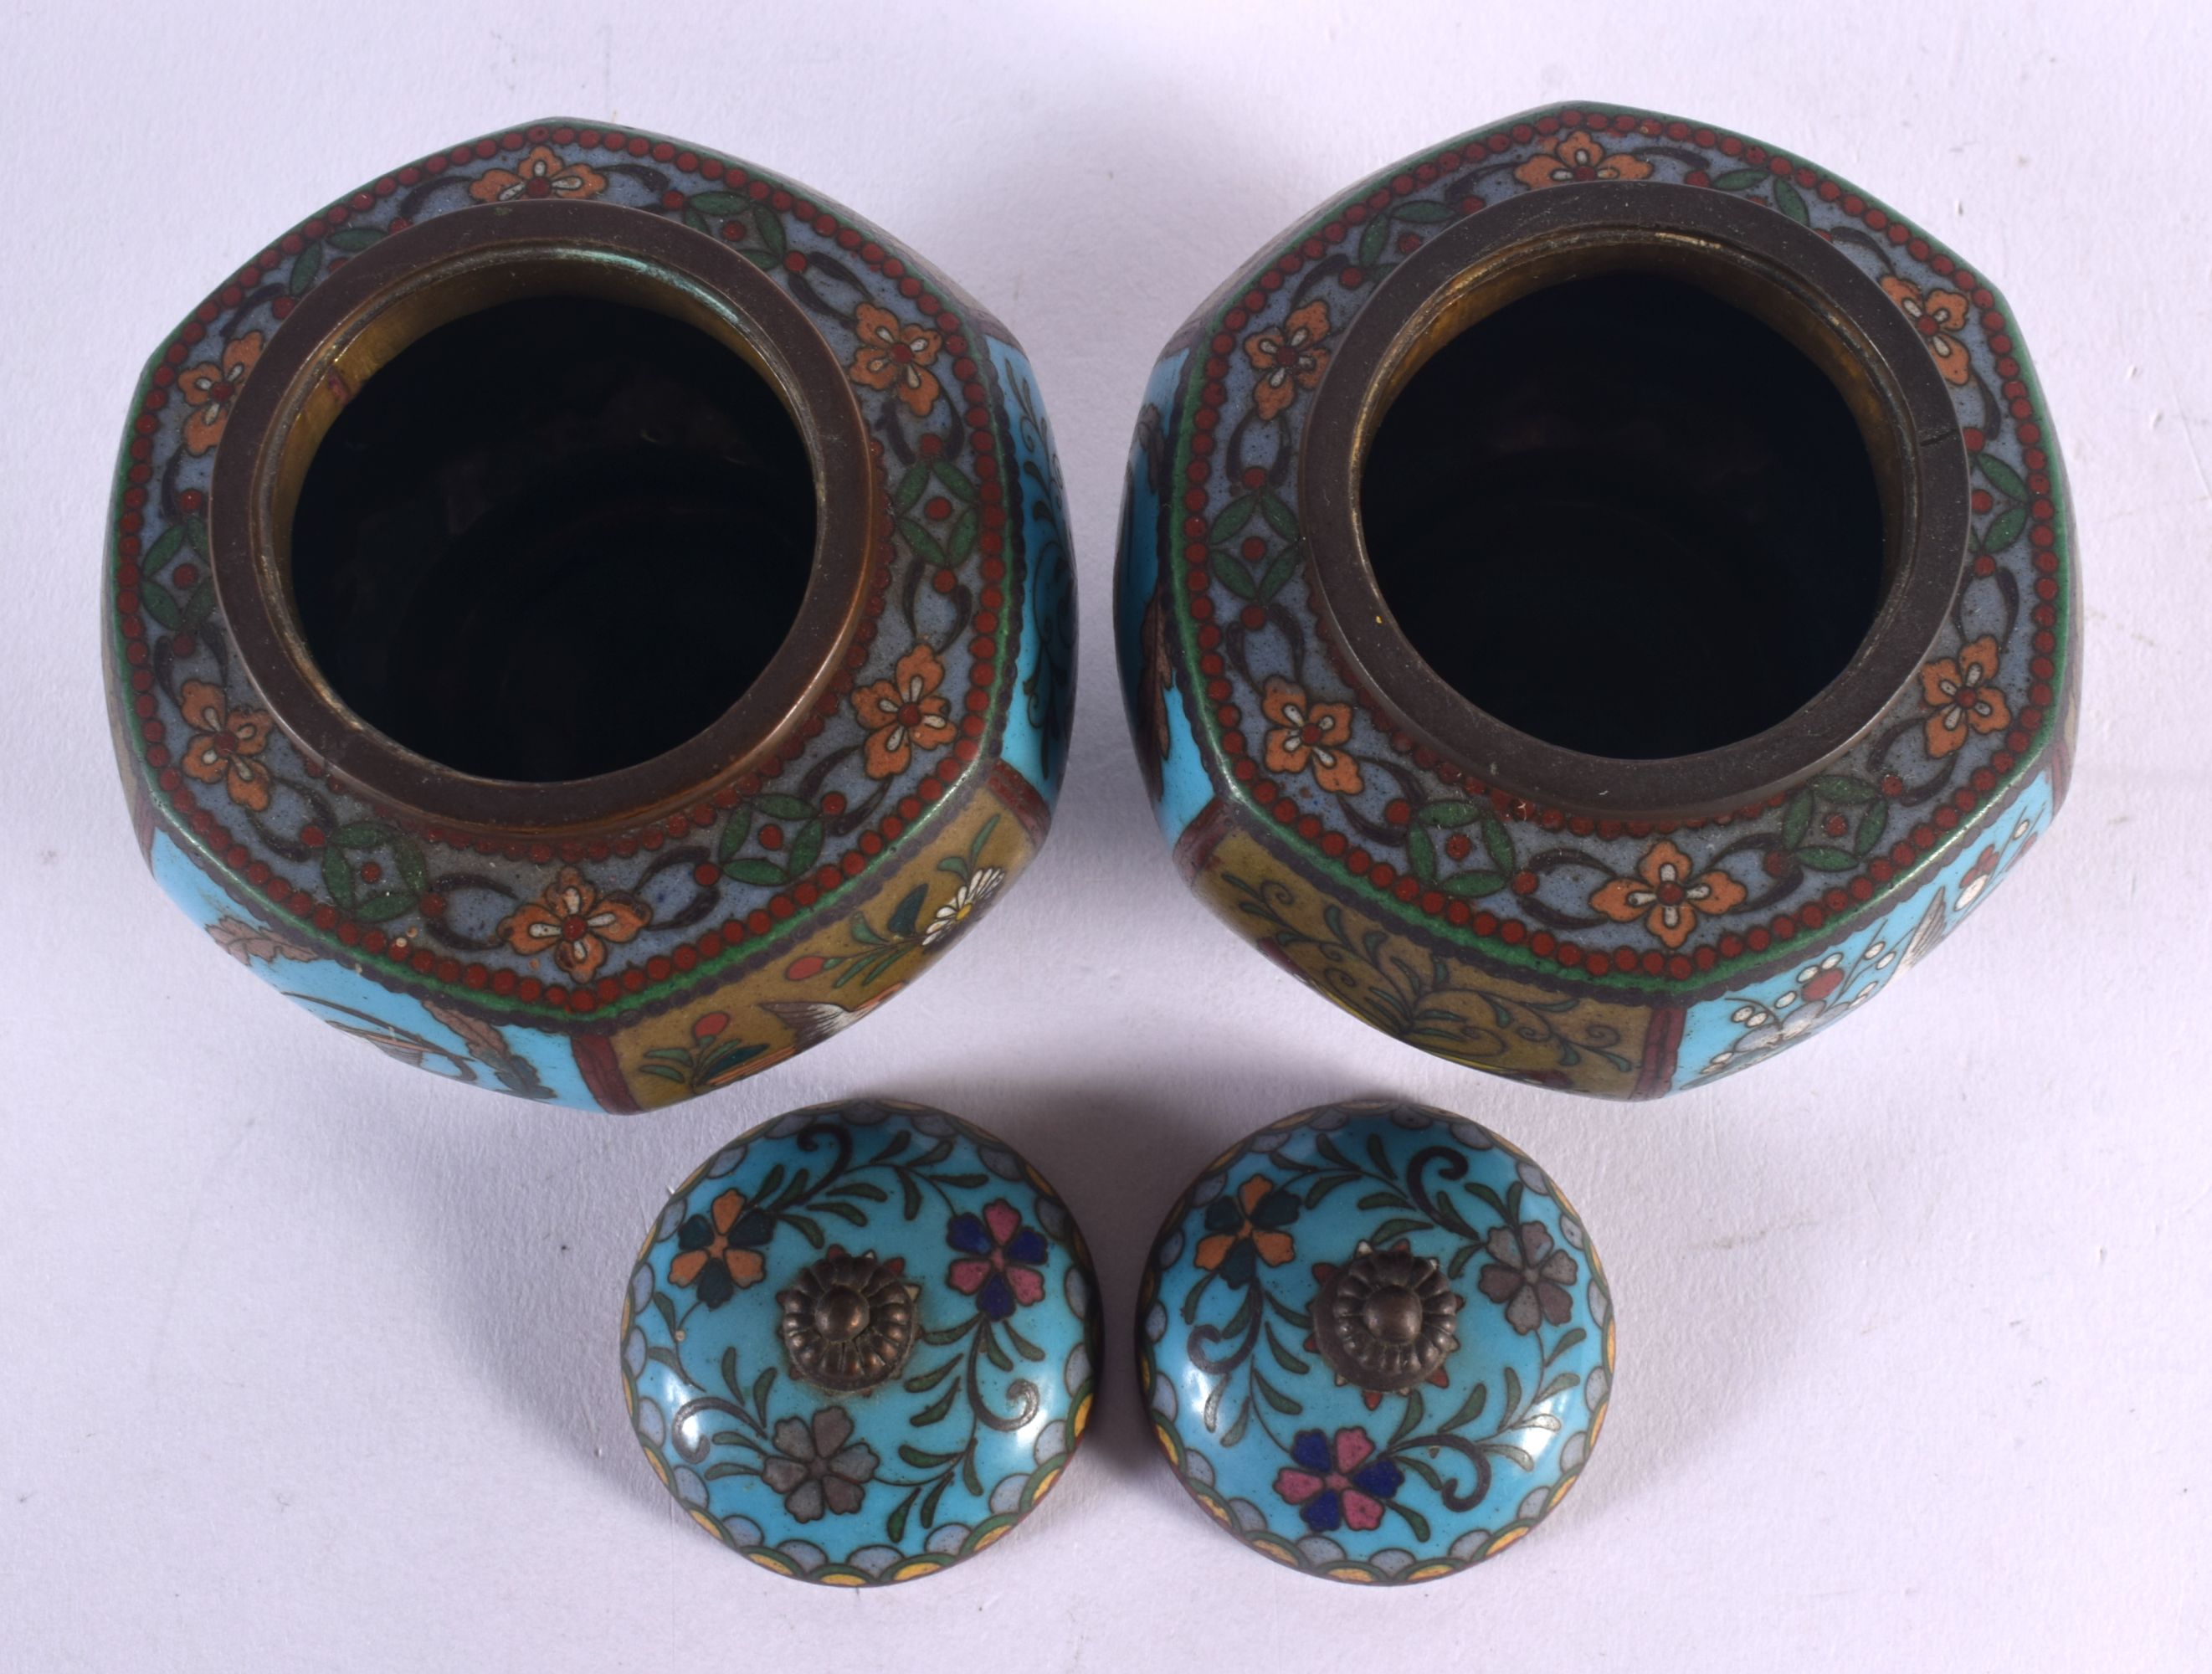 A PAIR OF 19TH CENTURY JAPANESE MEIJI PERIOD CLOISONNE ENAMEL JARS AND COVERS decorated with insects - Image 4 of 5